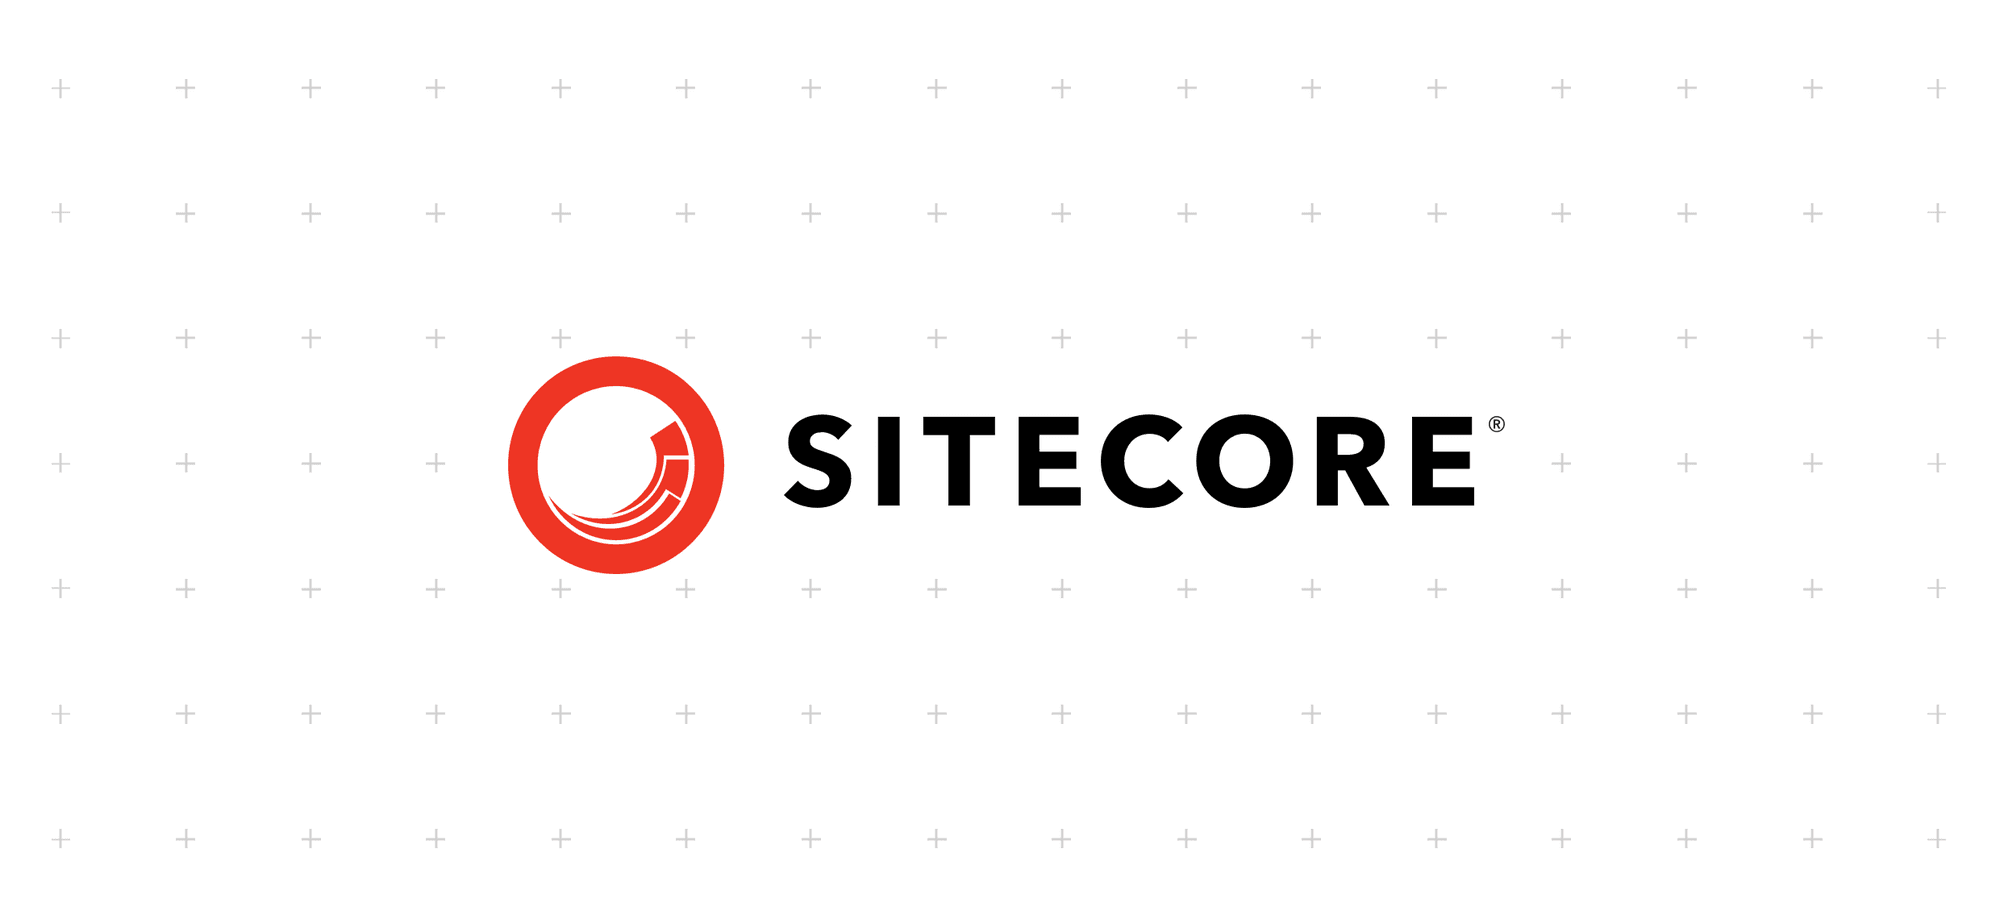 Scale Your Content And Optimize Your Content Creation Process With Sitecore Content Hub and CHILI Publisher